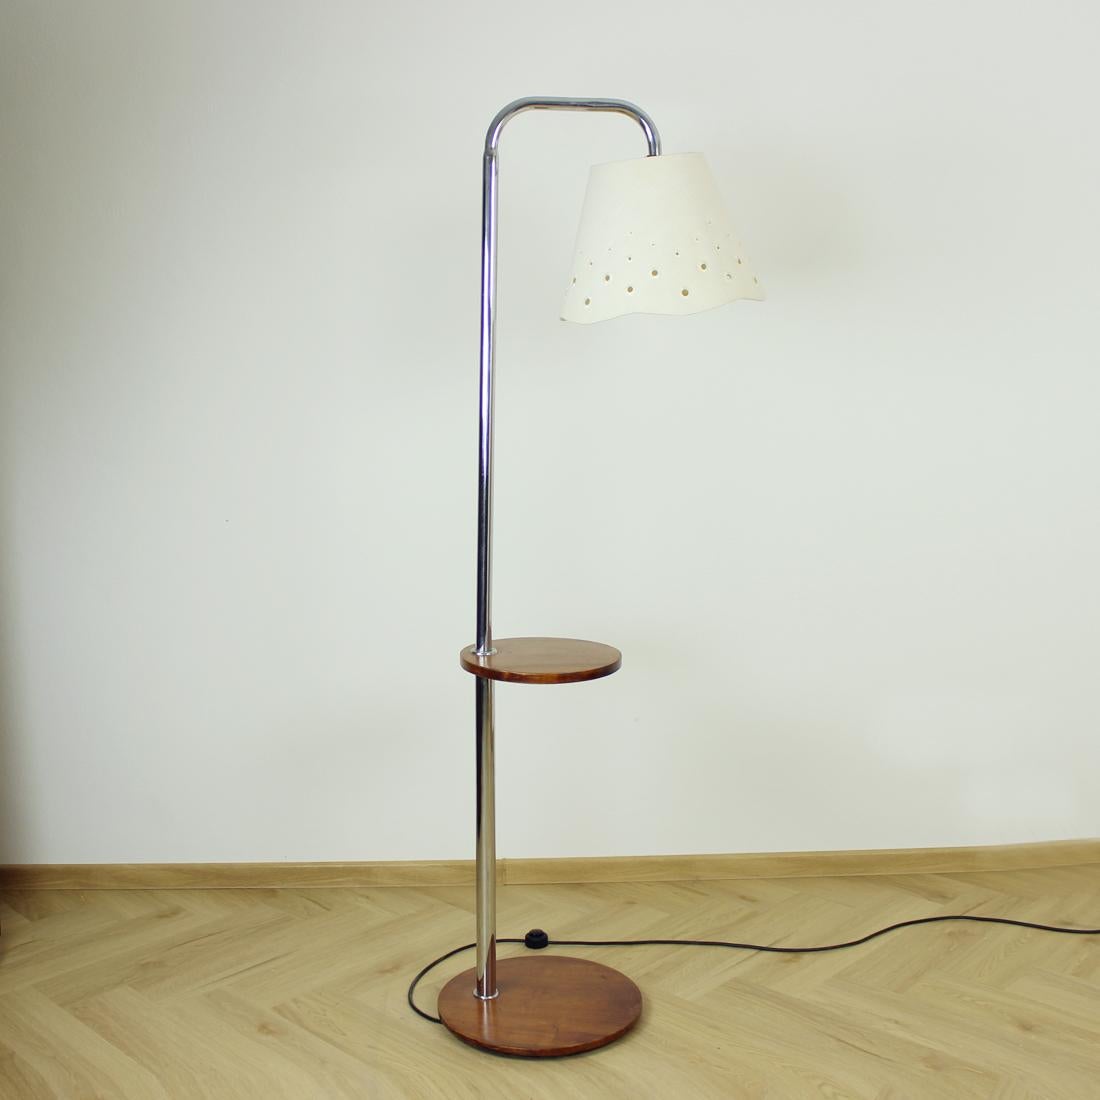 Beautiful art deco freestanding floor lamp produced by UP Zavody in Czechoslovakia, designed by Jindrich Halabala. The lamp stands on a single wooden base which holds the a strong chrome steel rod. There is a wooden shelf on the lamp. The wood is